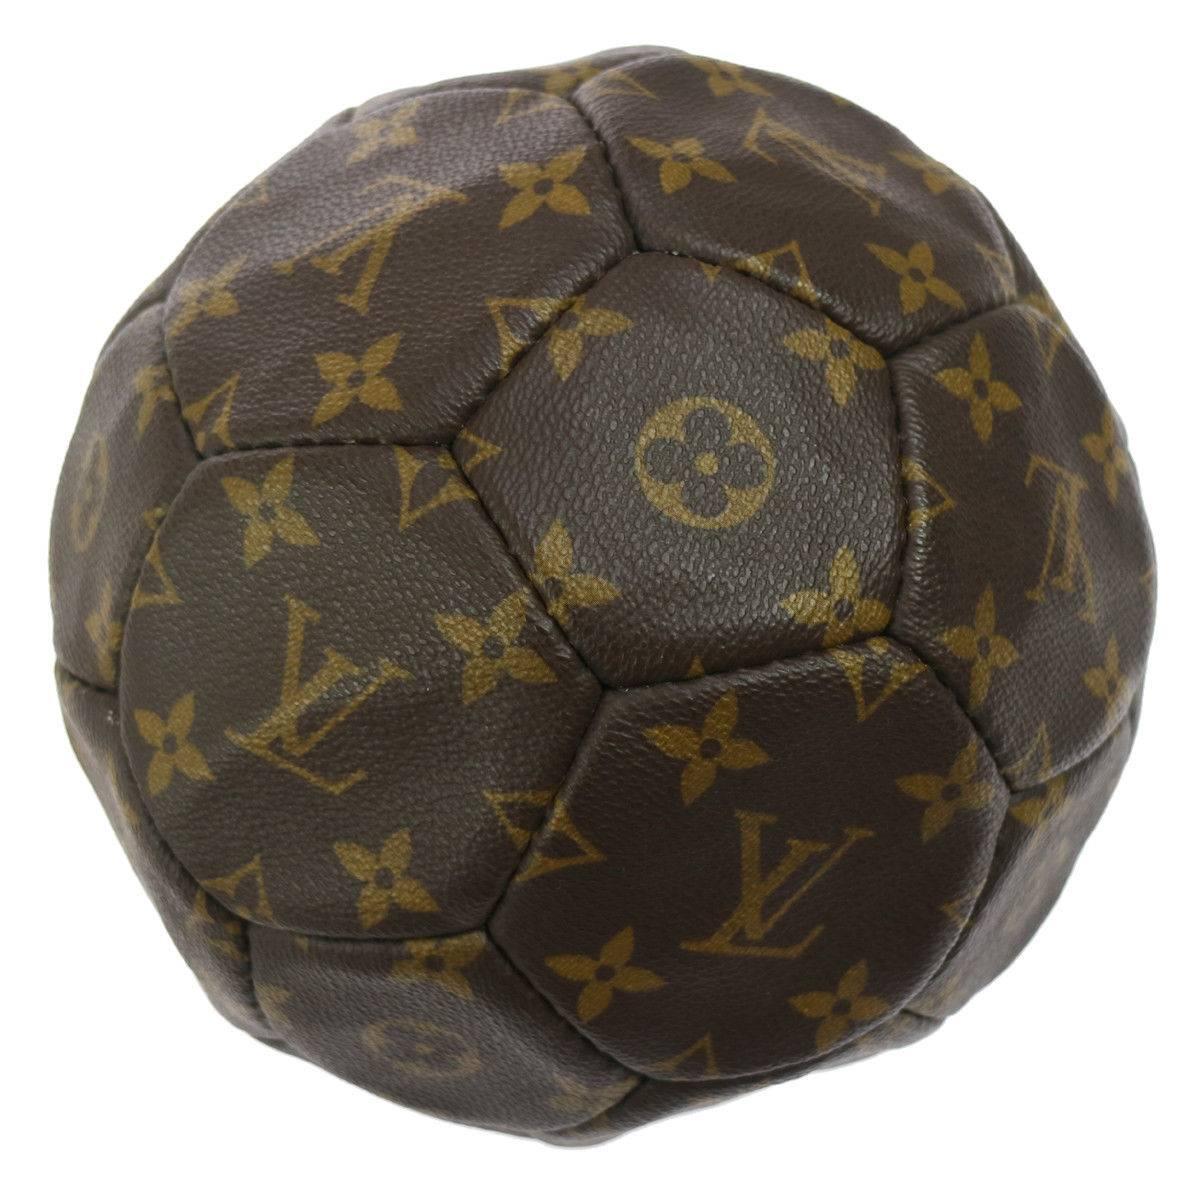 Louis Vuitton Monogram Collector's Soccer Ball in Leather Carrying Strap Holster 

From France World Cup 1998
Monogram canvas
Leather
Signed France 1998
Date codes present 
Made in France
Diameter 7 "
Carrying strap drop 14"
Includes